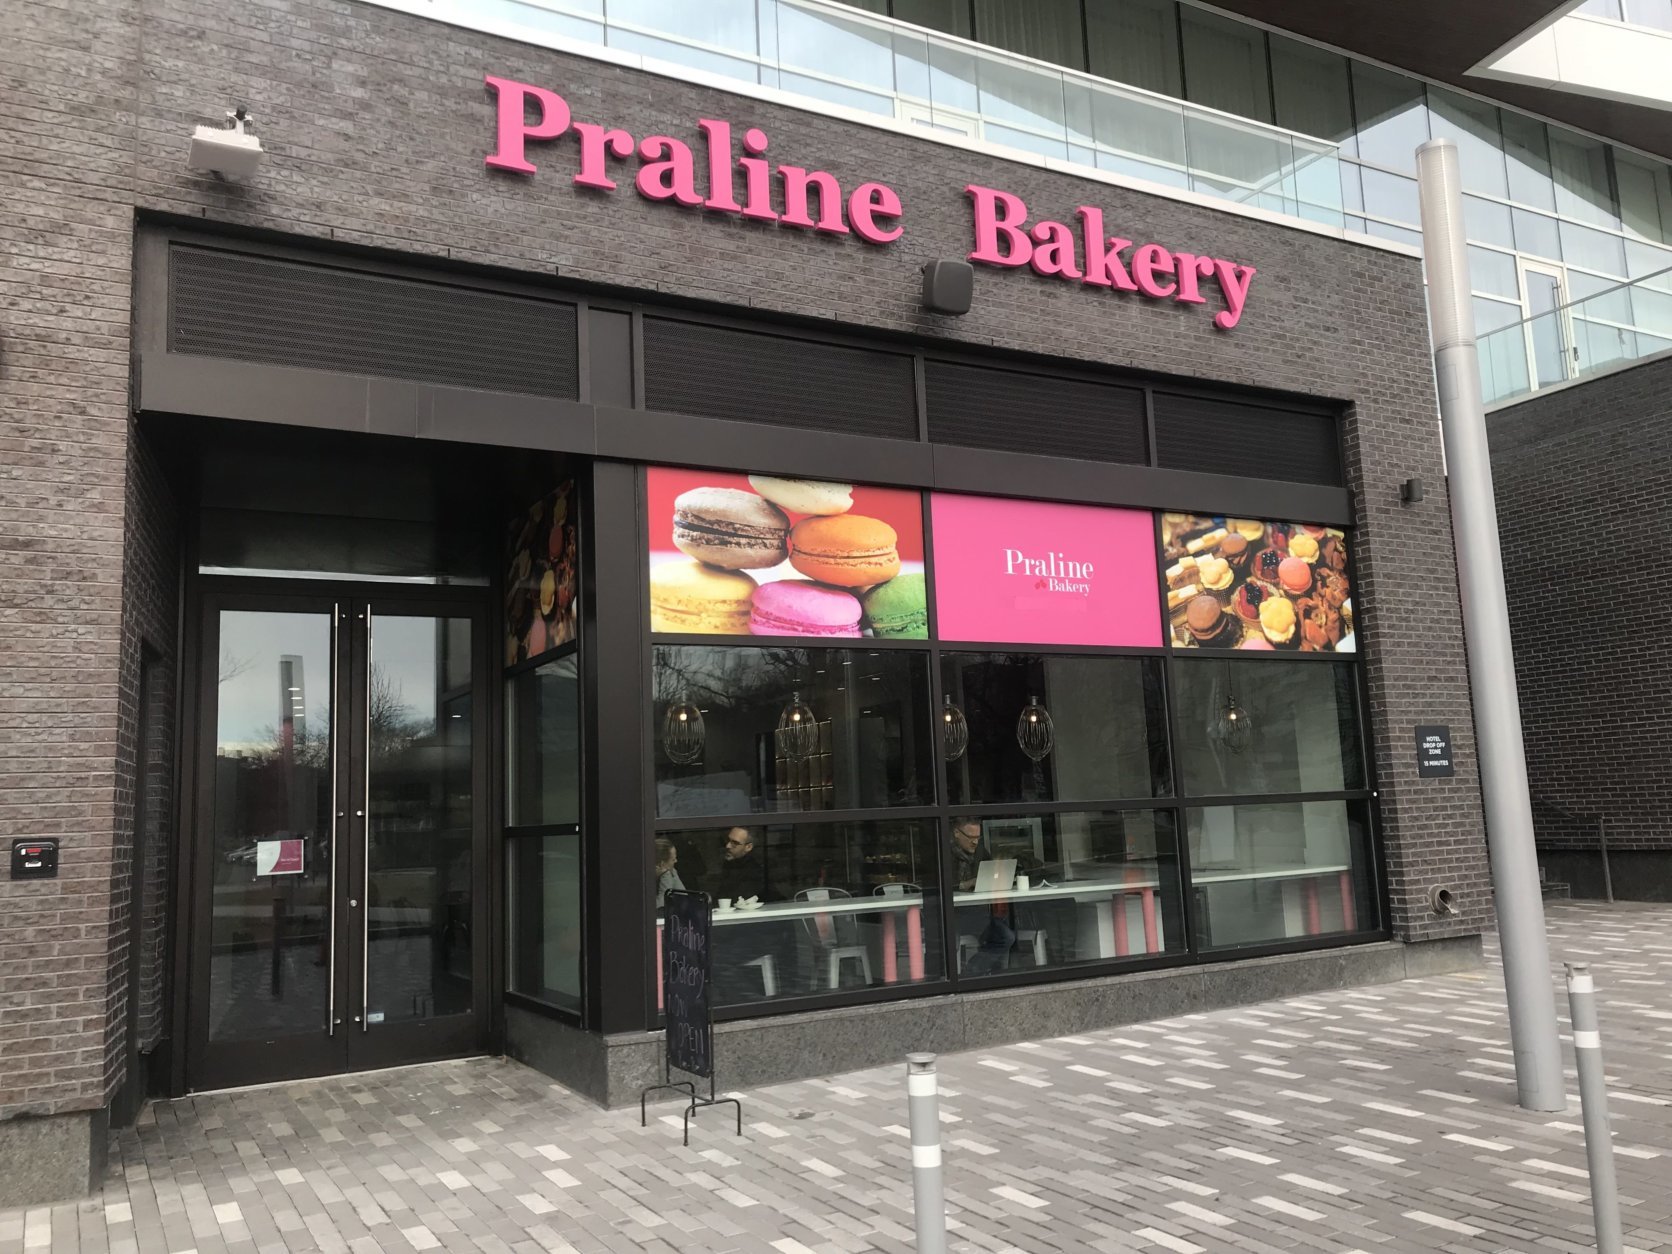 Praline Bakery has opened a new 2,500-square foot store at The Wharf. (Courtesy: Praline Bakery and Bistro)